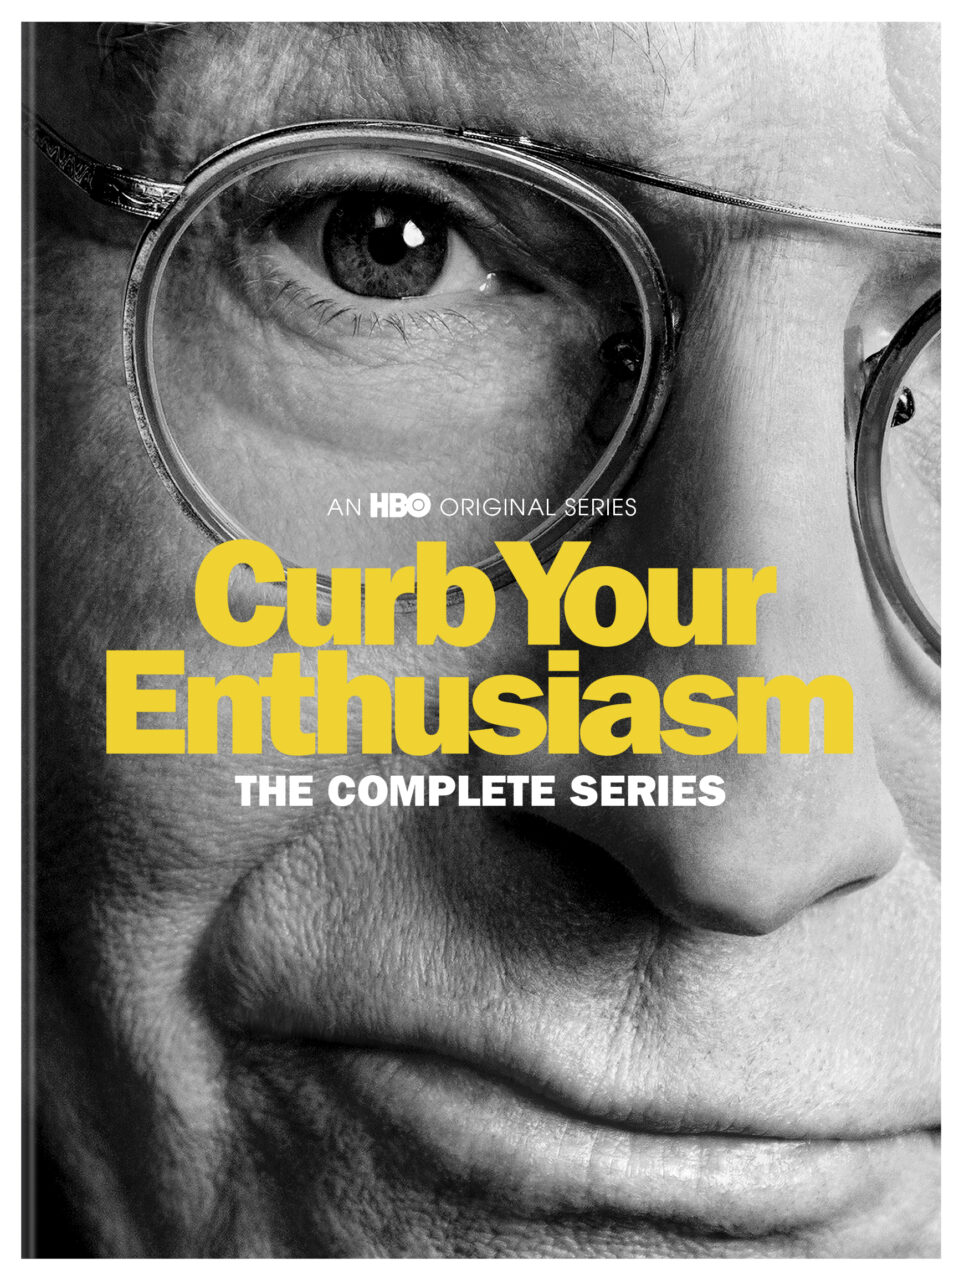 Curb Your Enthusiasm: The Complete Series cover (Warner Bros. Discovery Home Entertainment)